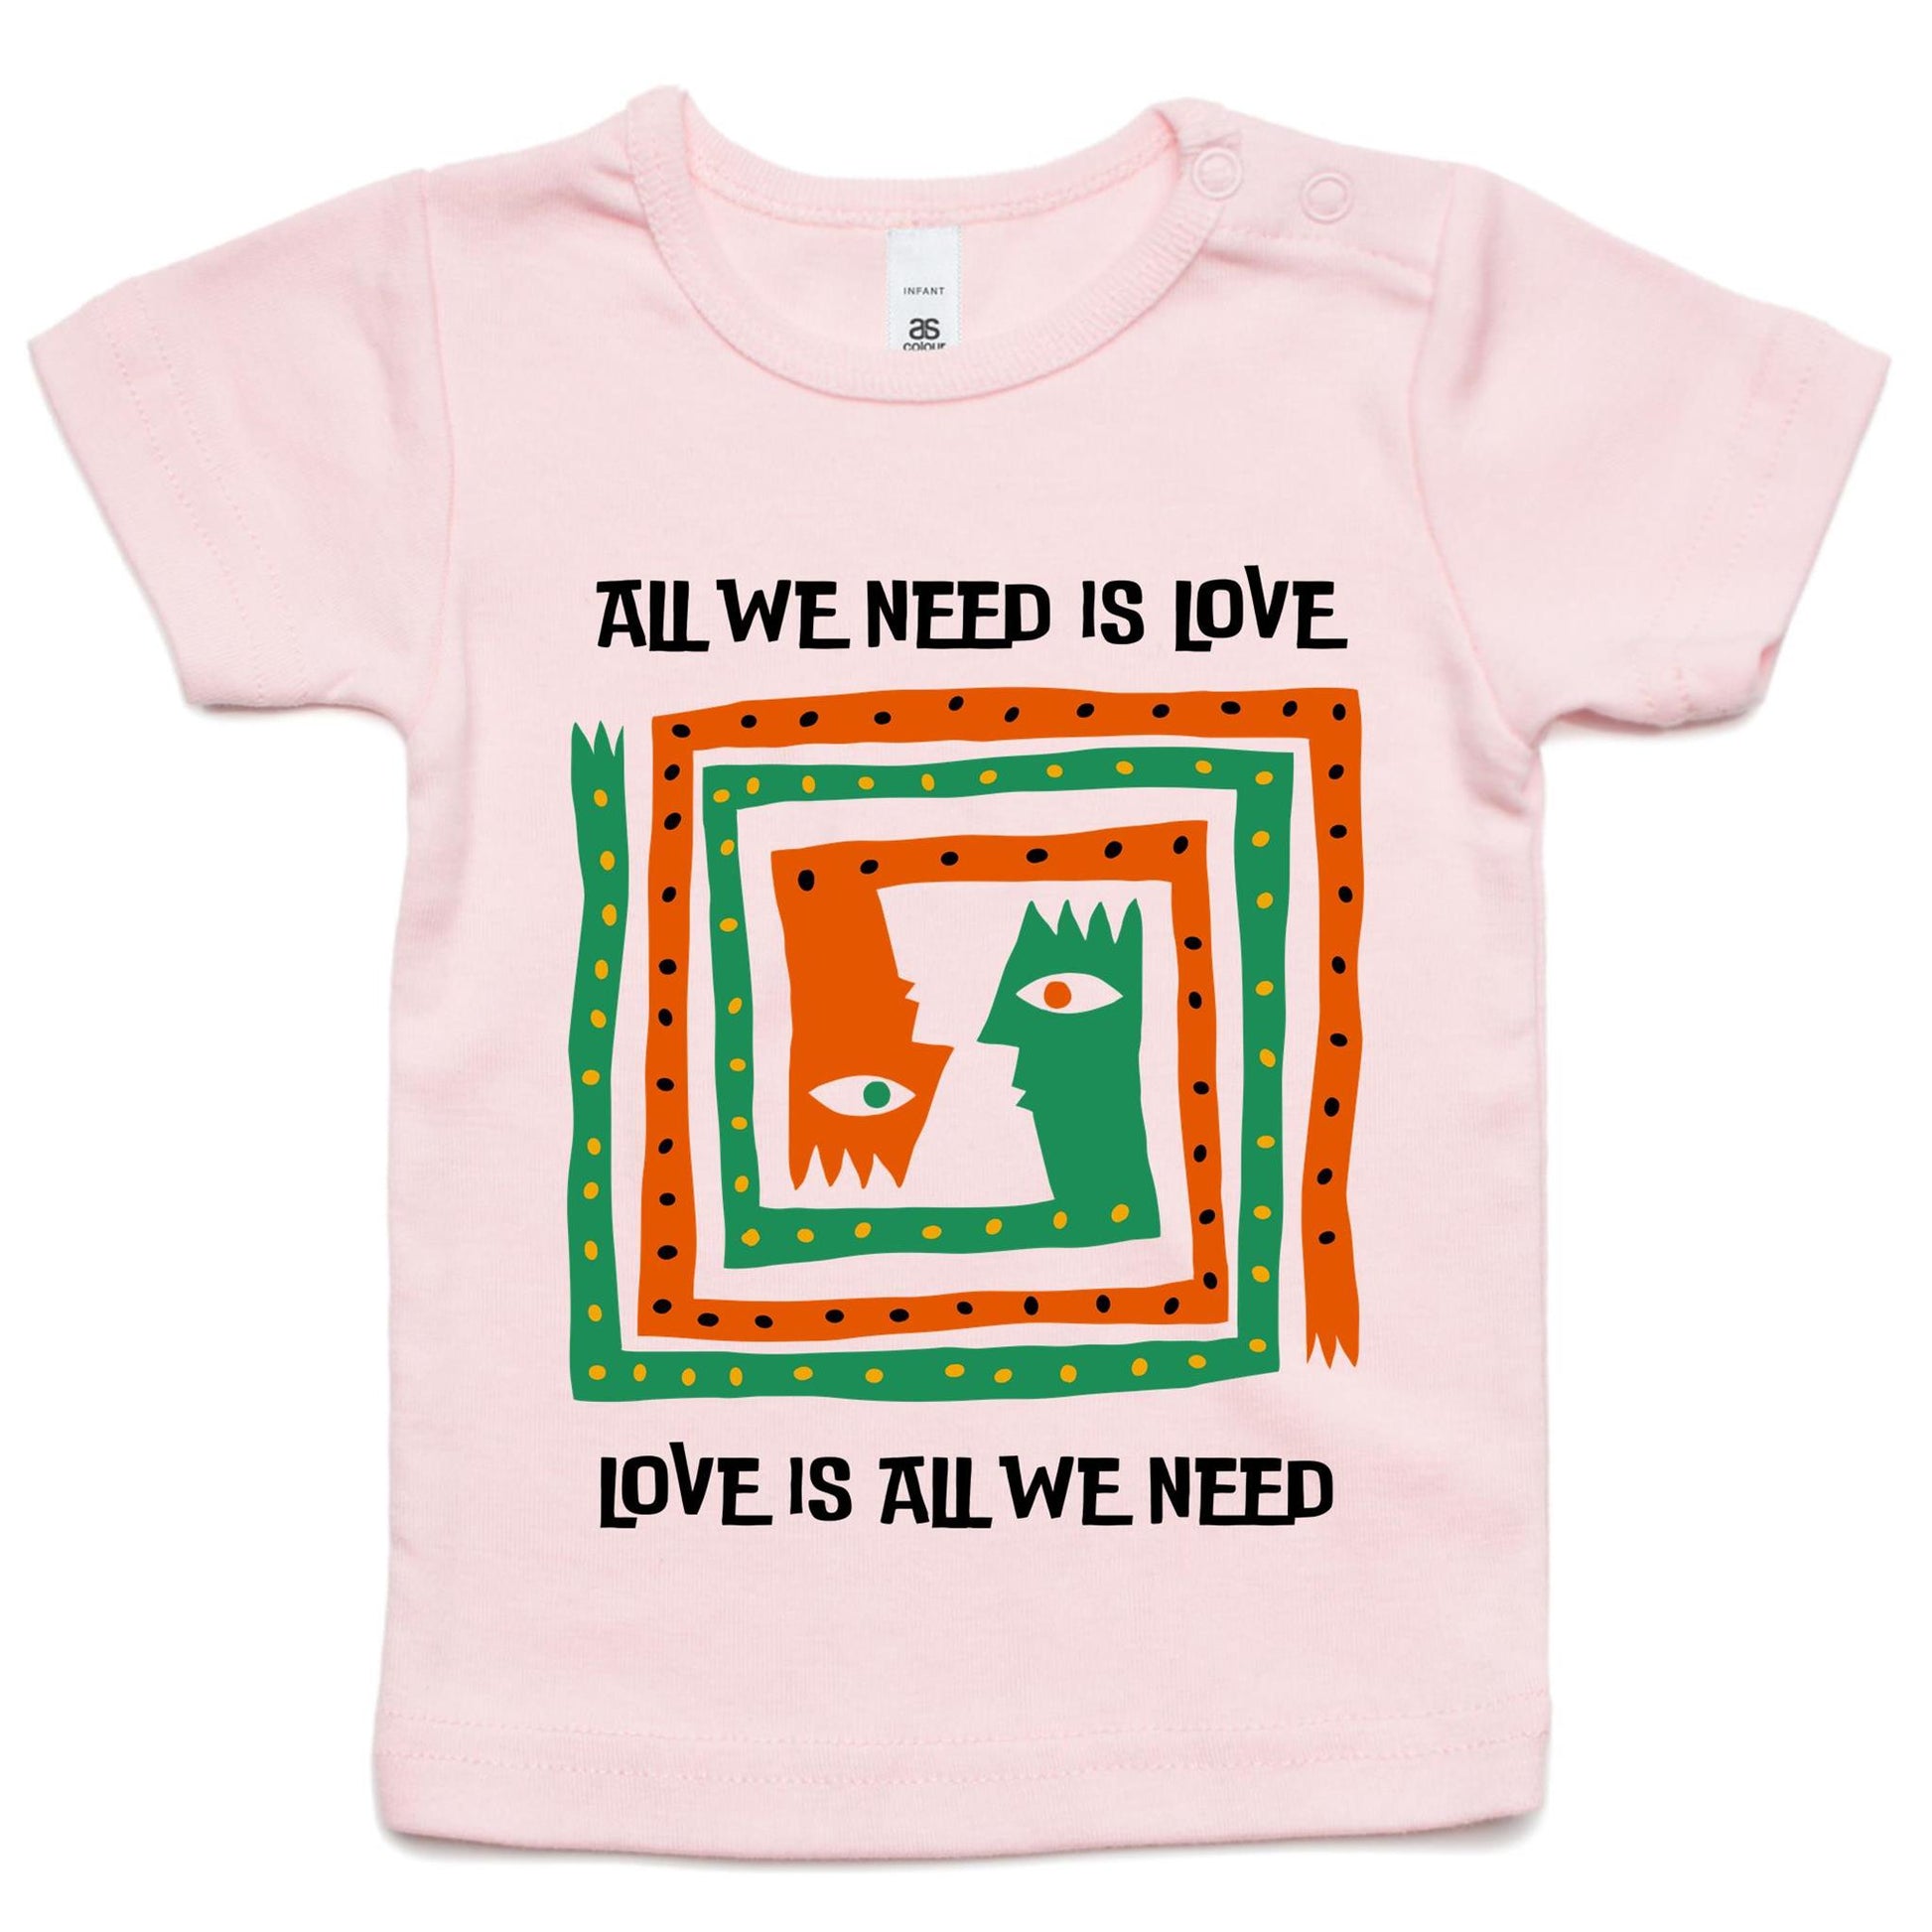 All We Need Is Love - Baby T-shirt Pink Baby T-shirt